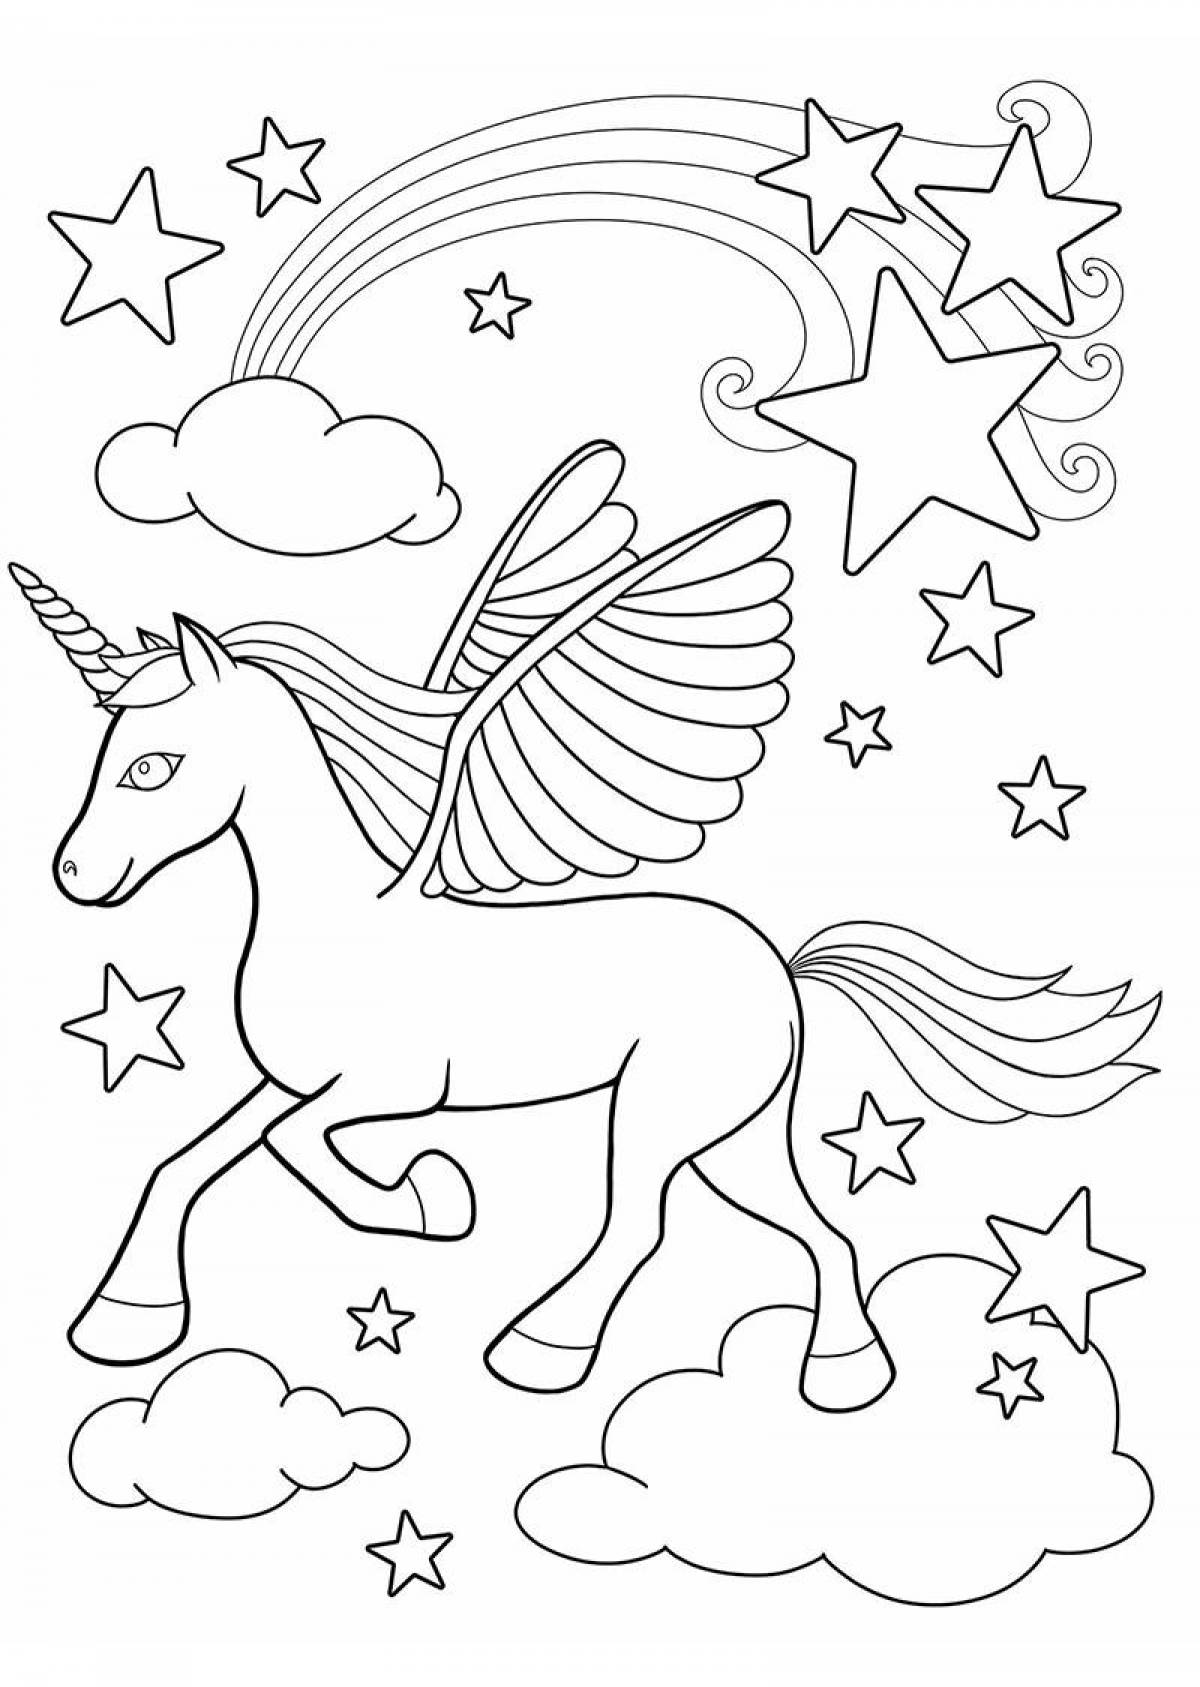 Cute unicorn coloring book for kids 6-7 years old